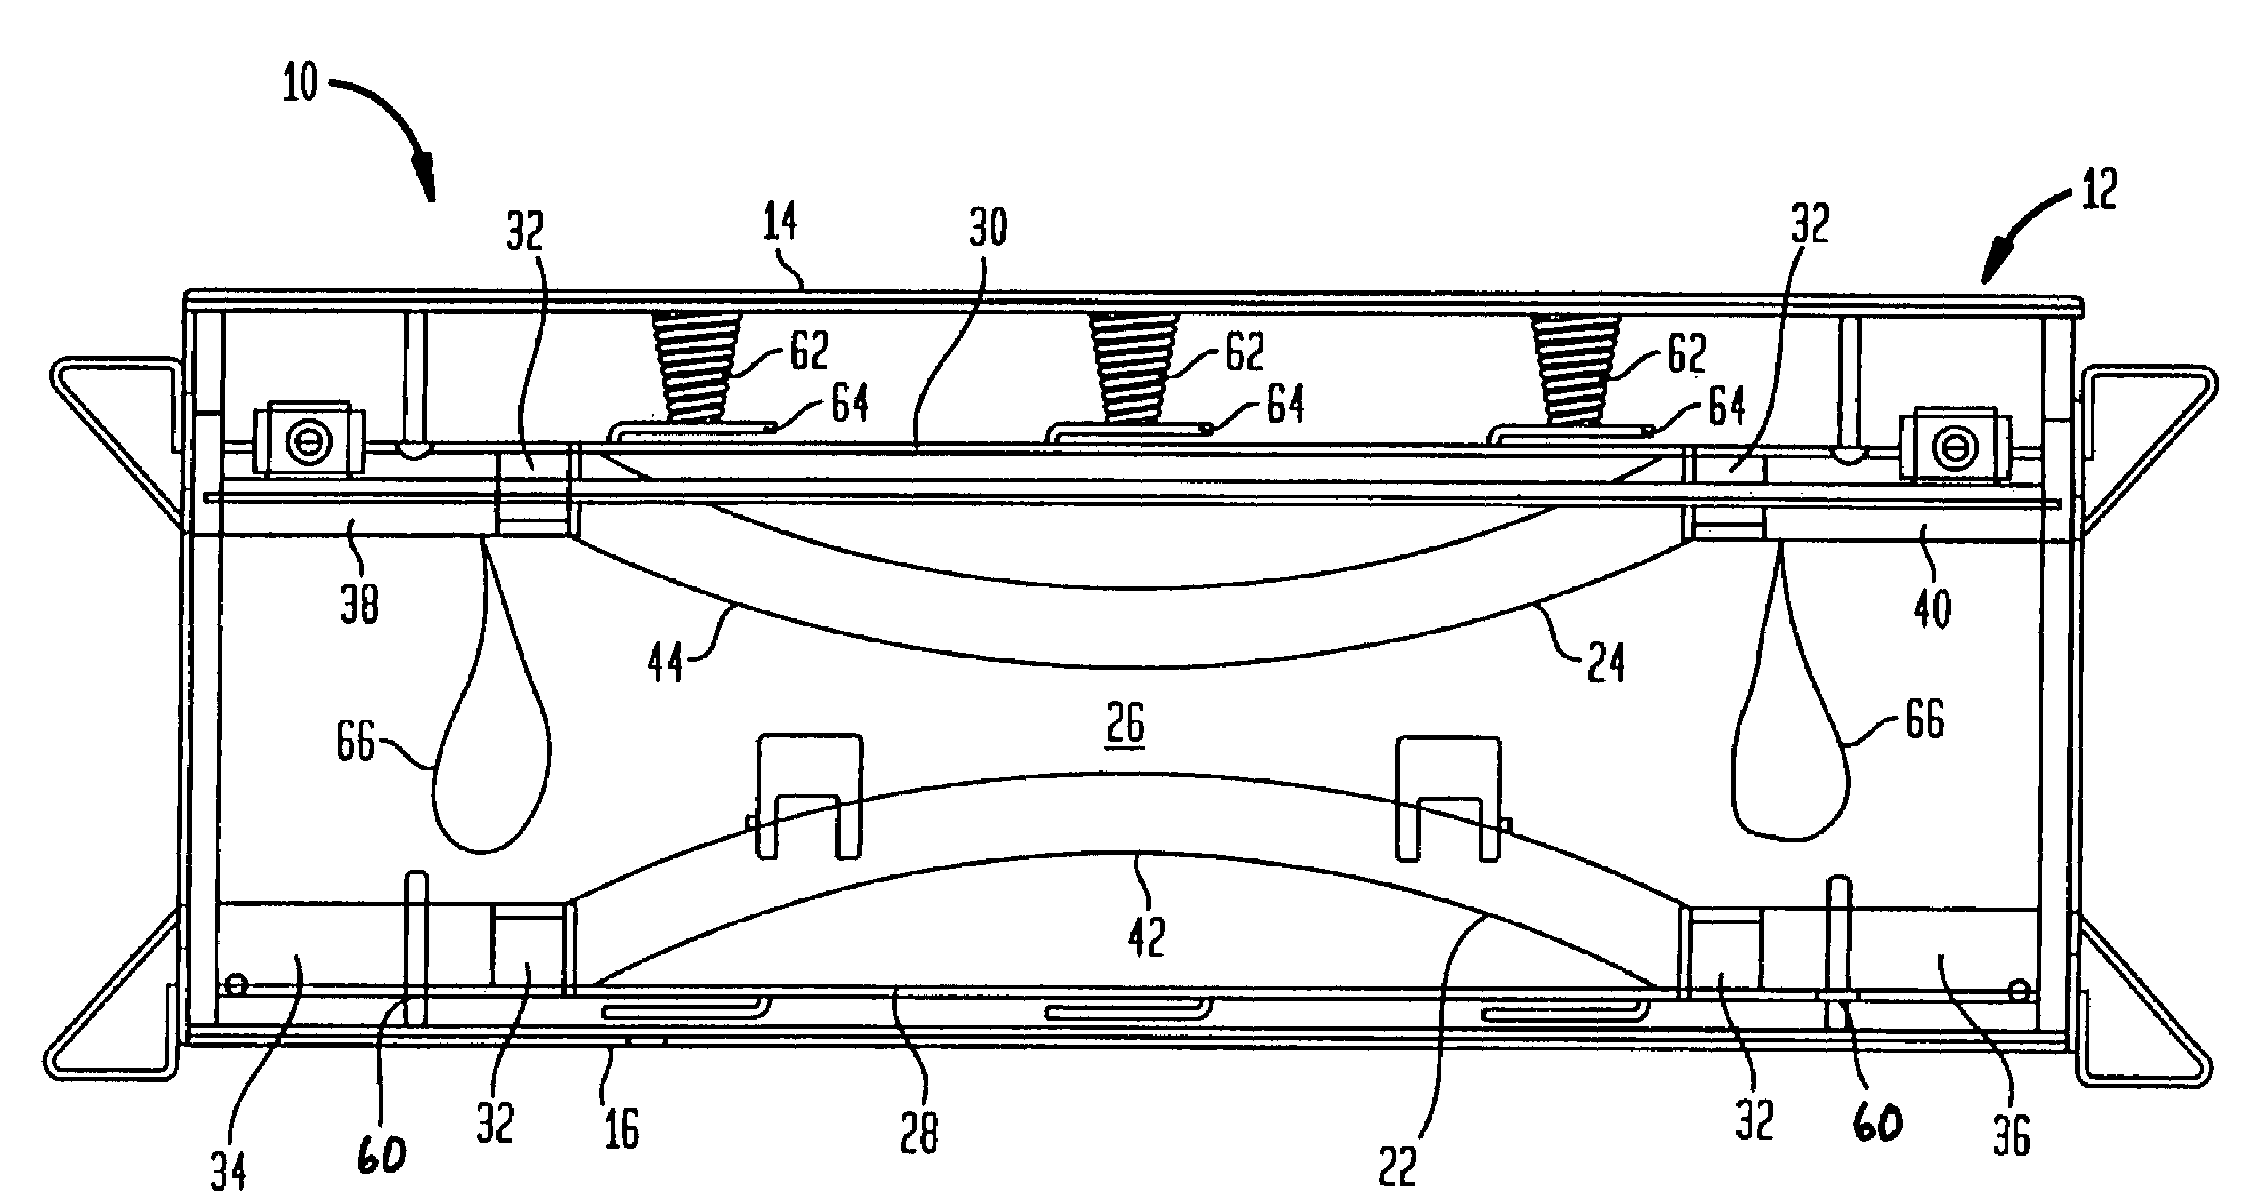 Intumescent firestopping apparatus and method